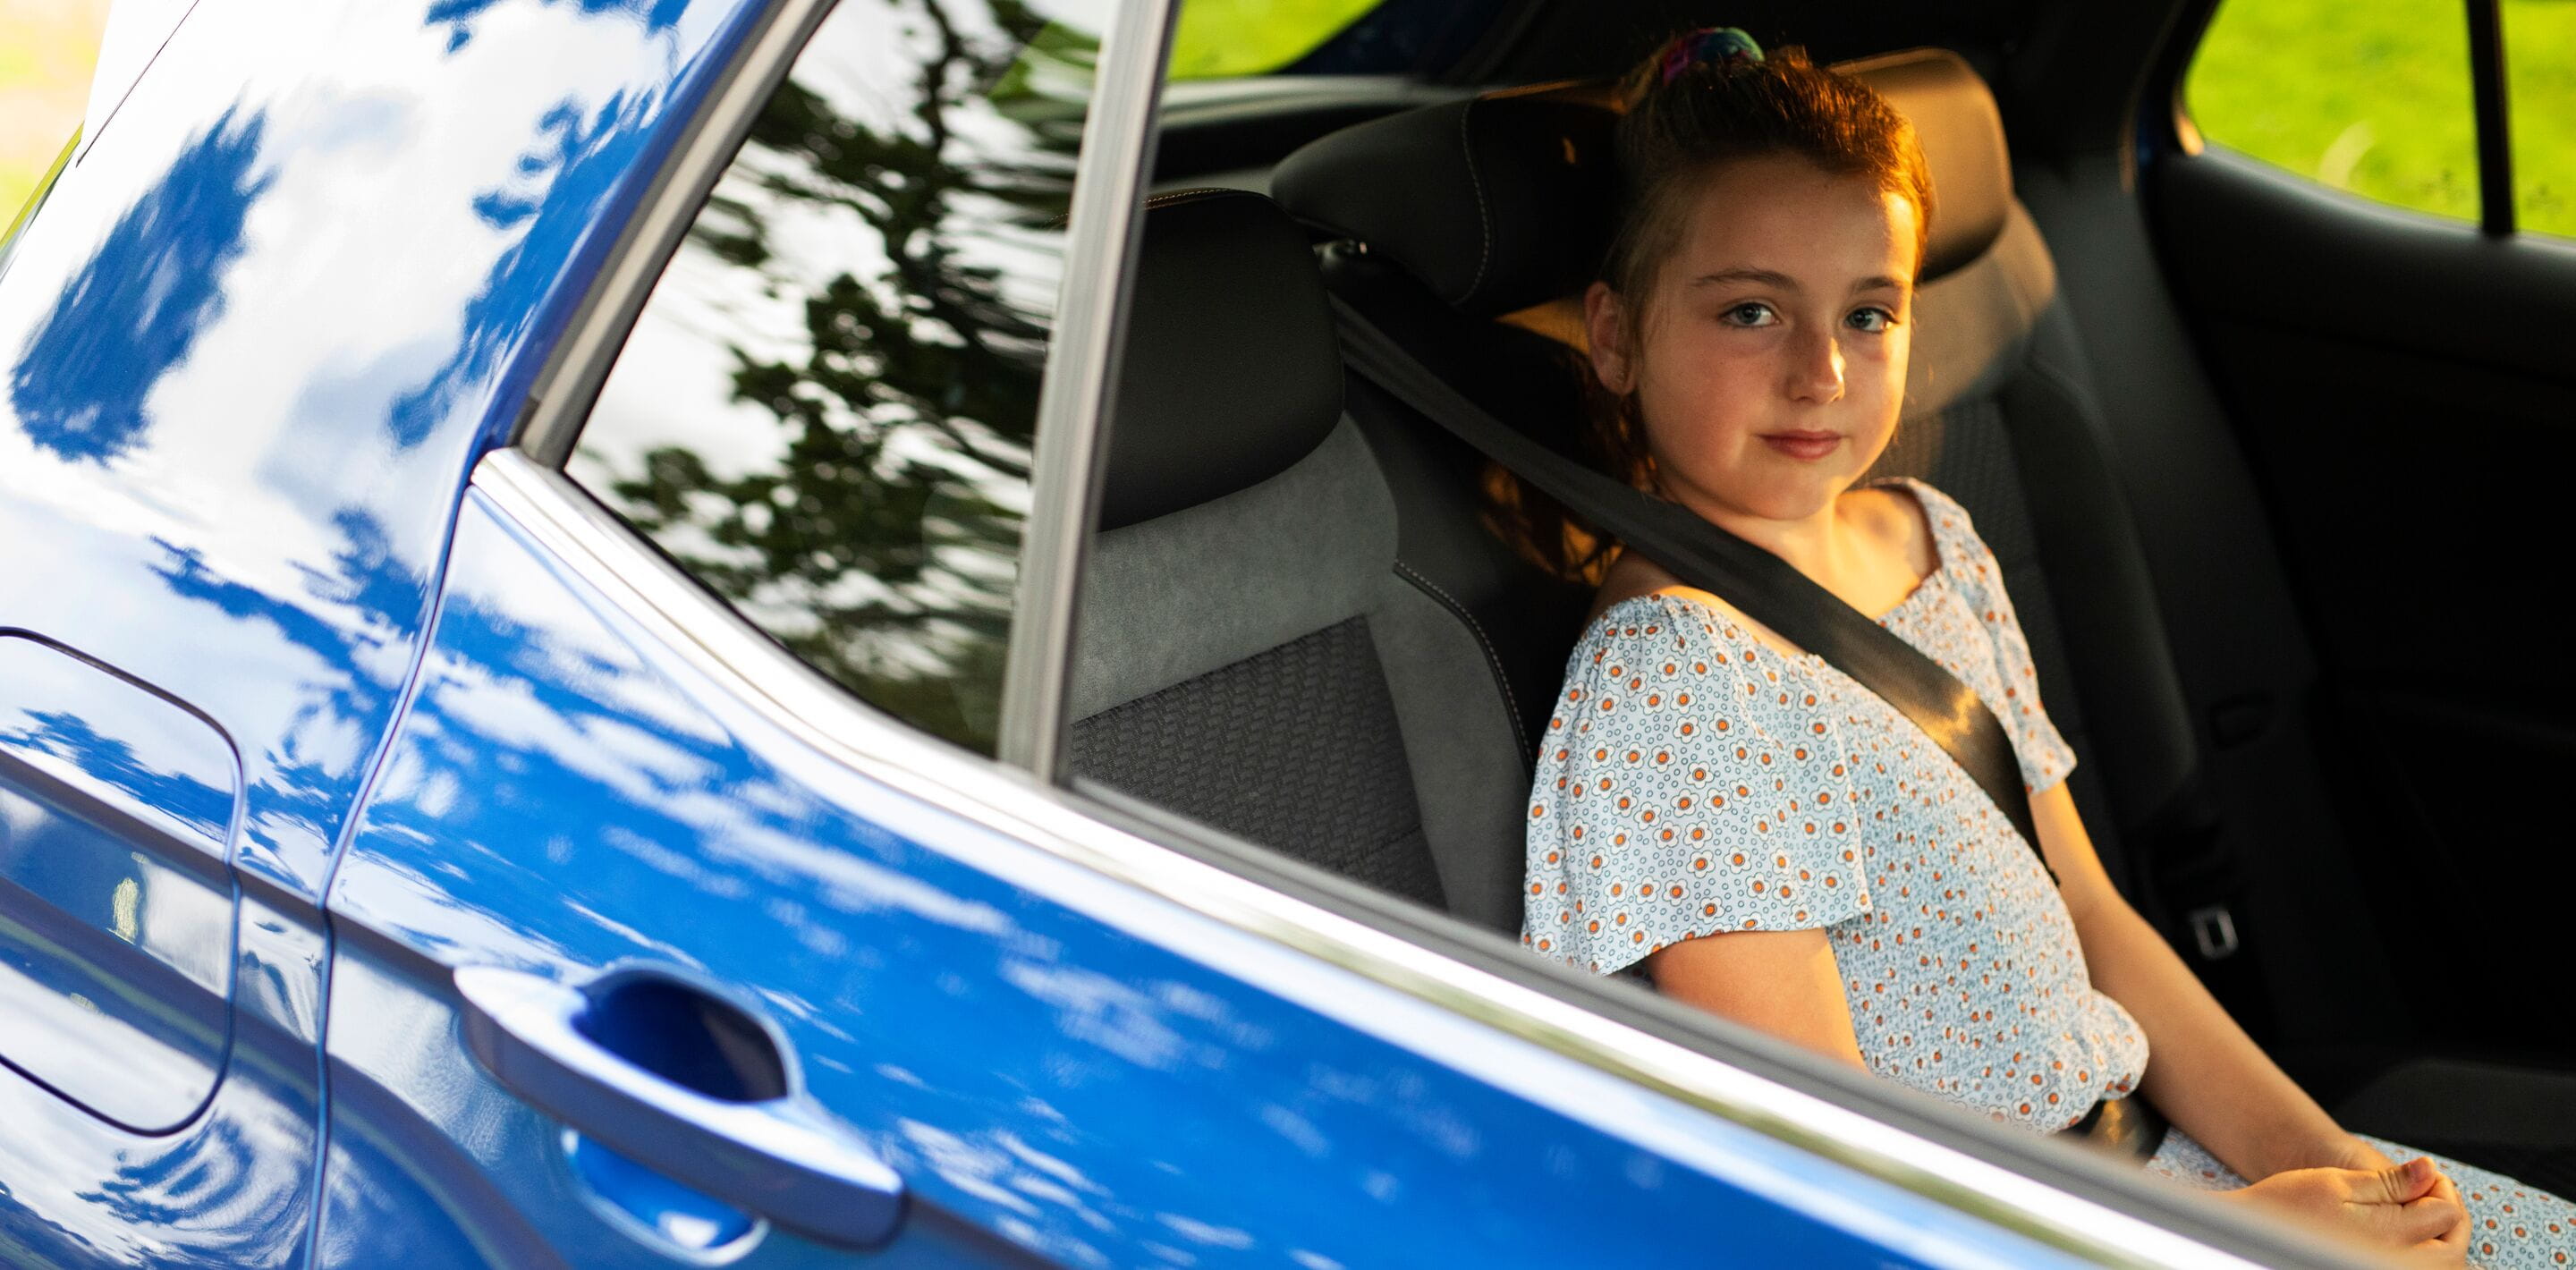 Child in backseat of a blue car